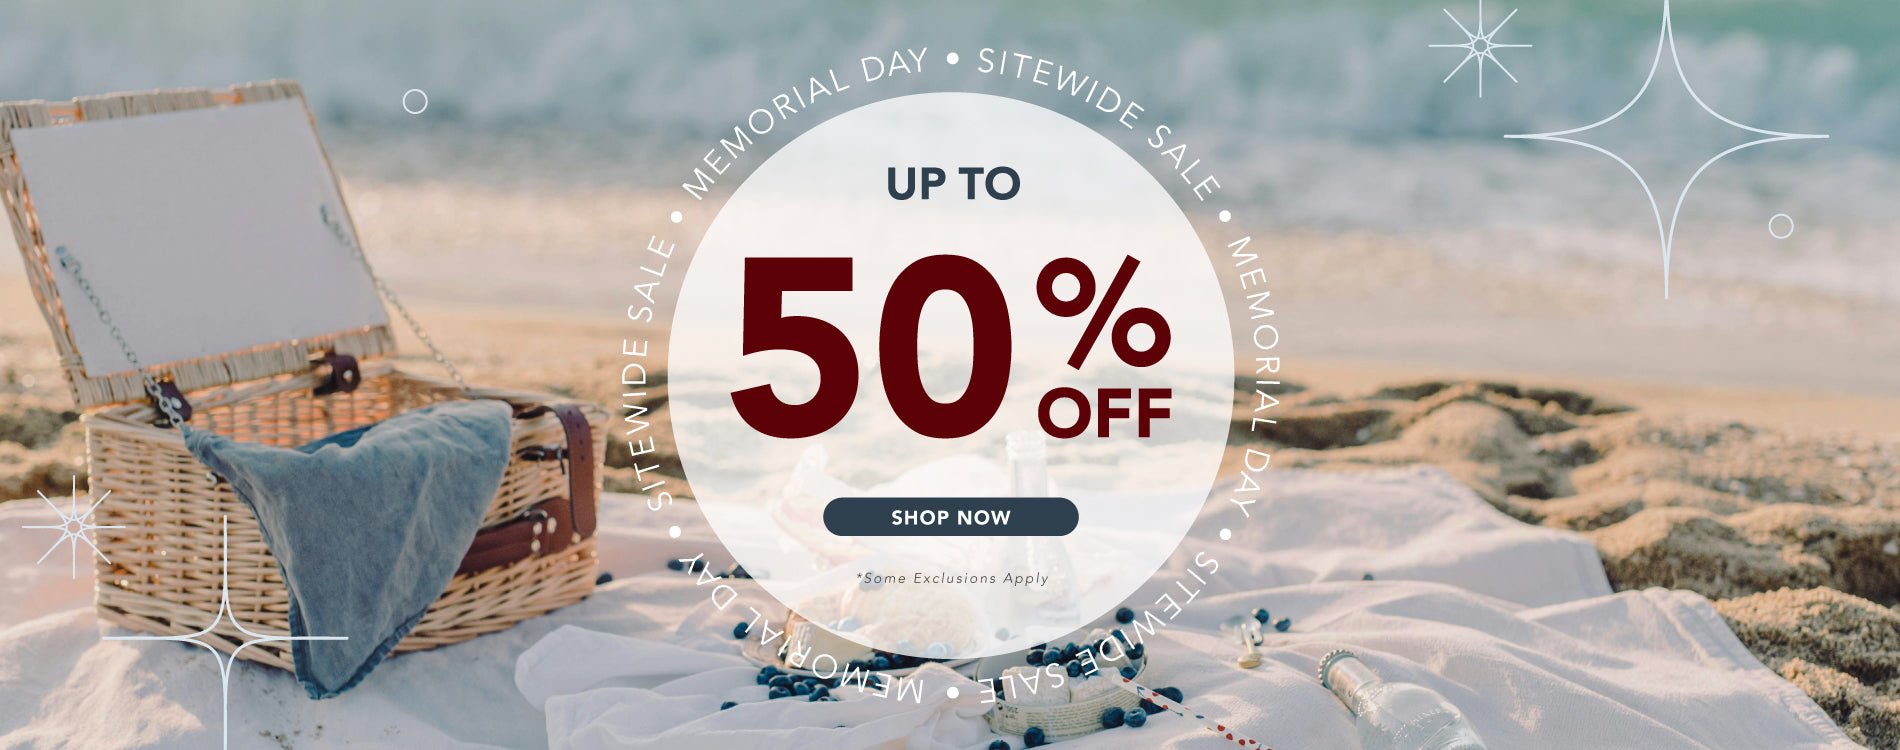 Enjoy up to 50% off sitewide to celebrate Memorial Day for a limited time only! Some exclusions apply.